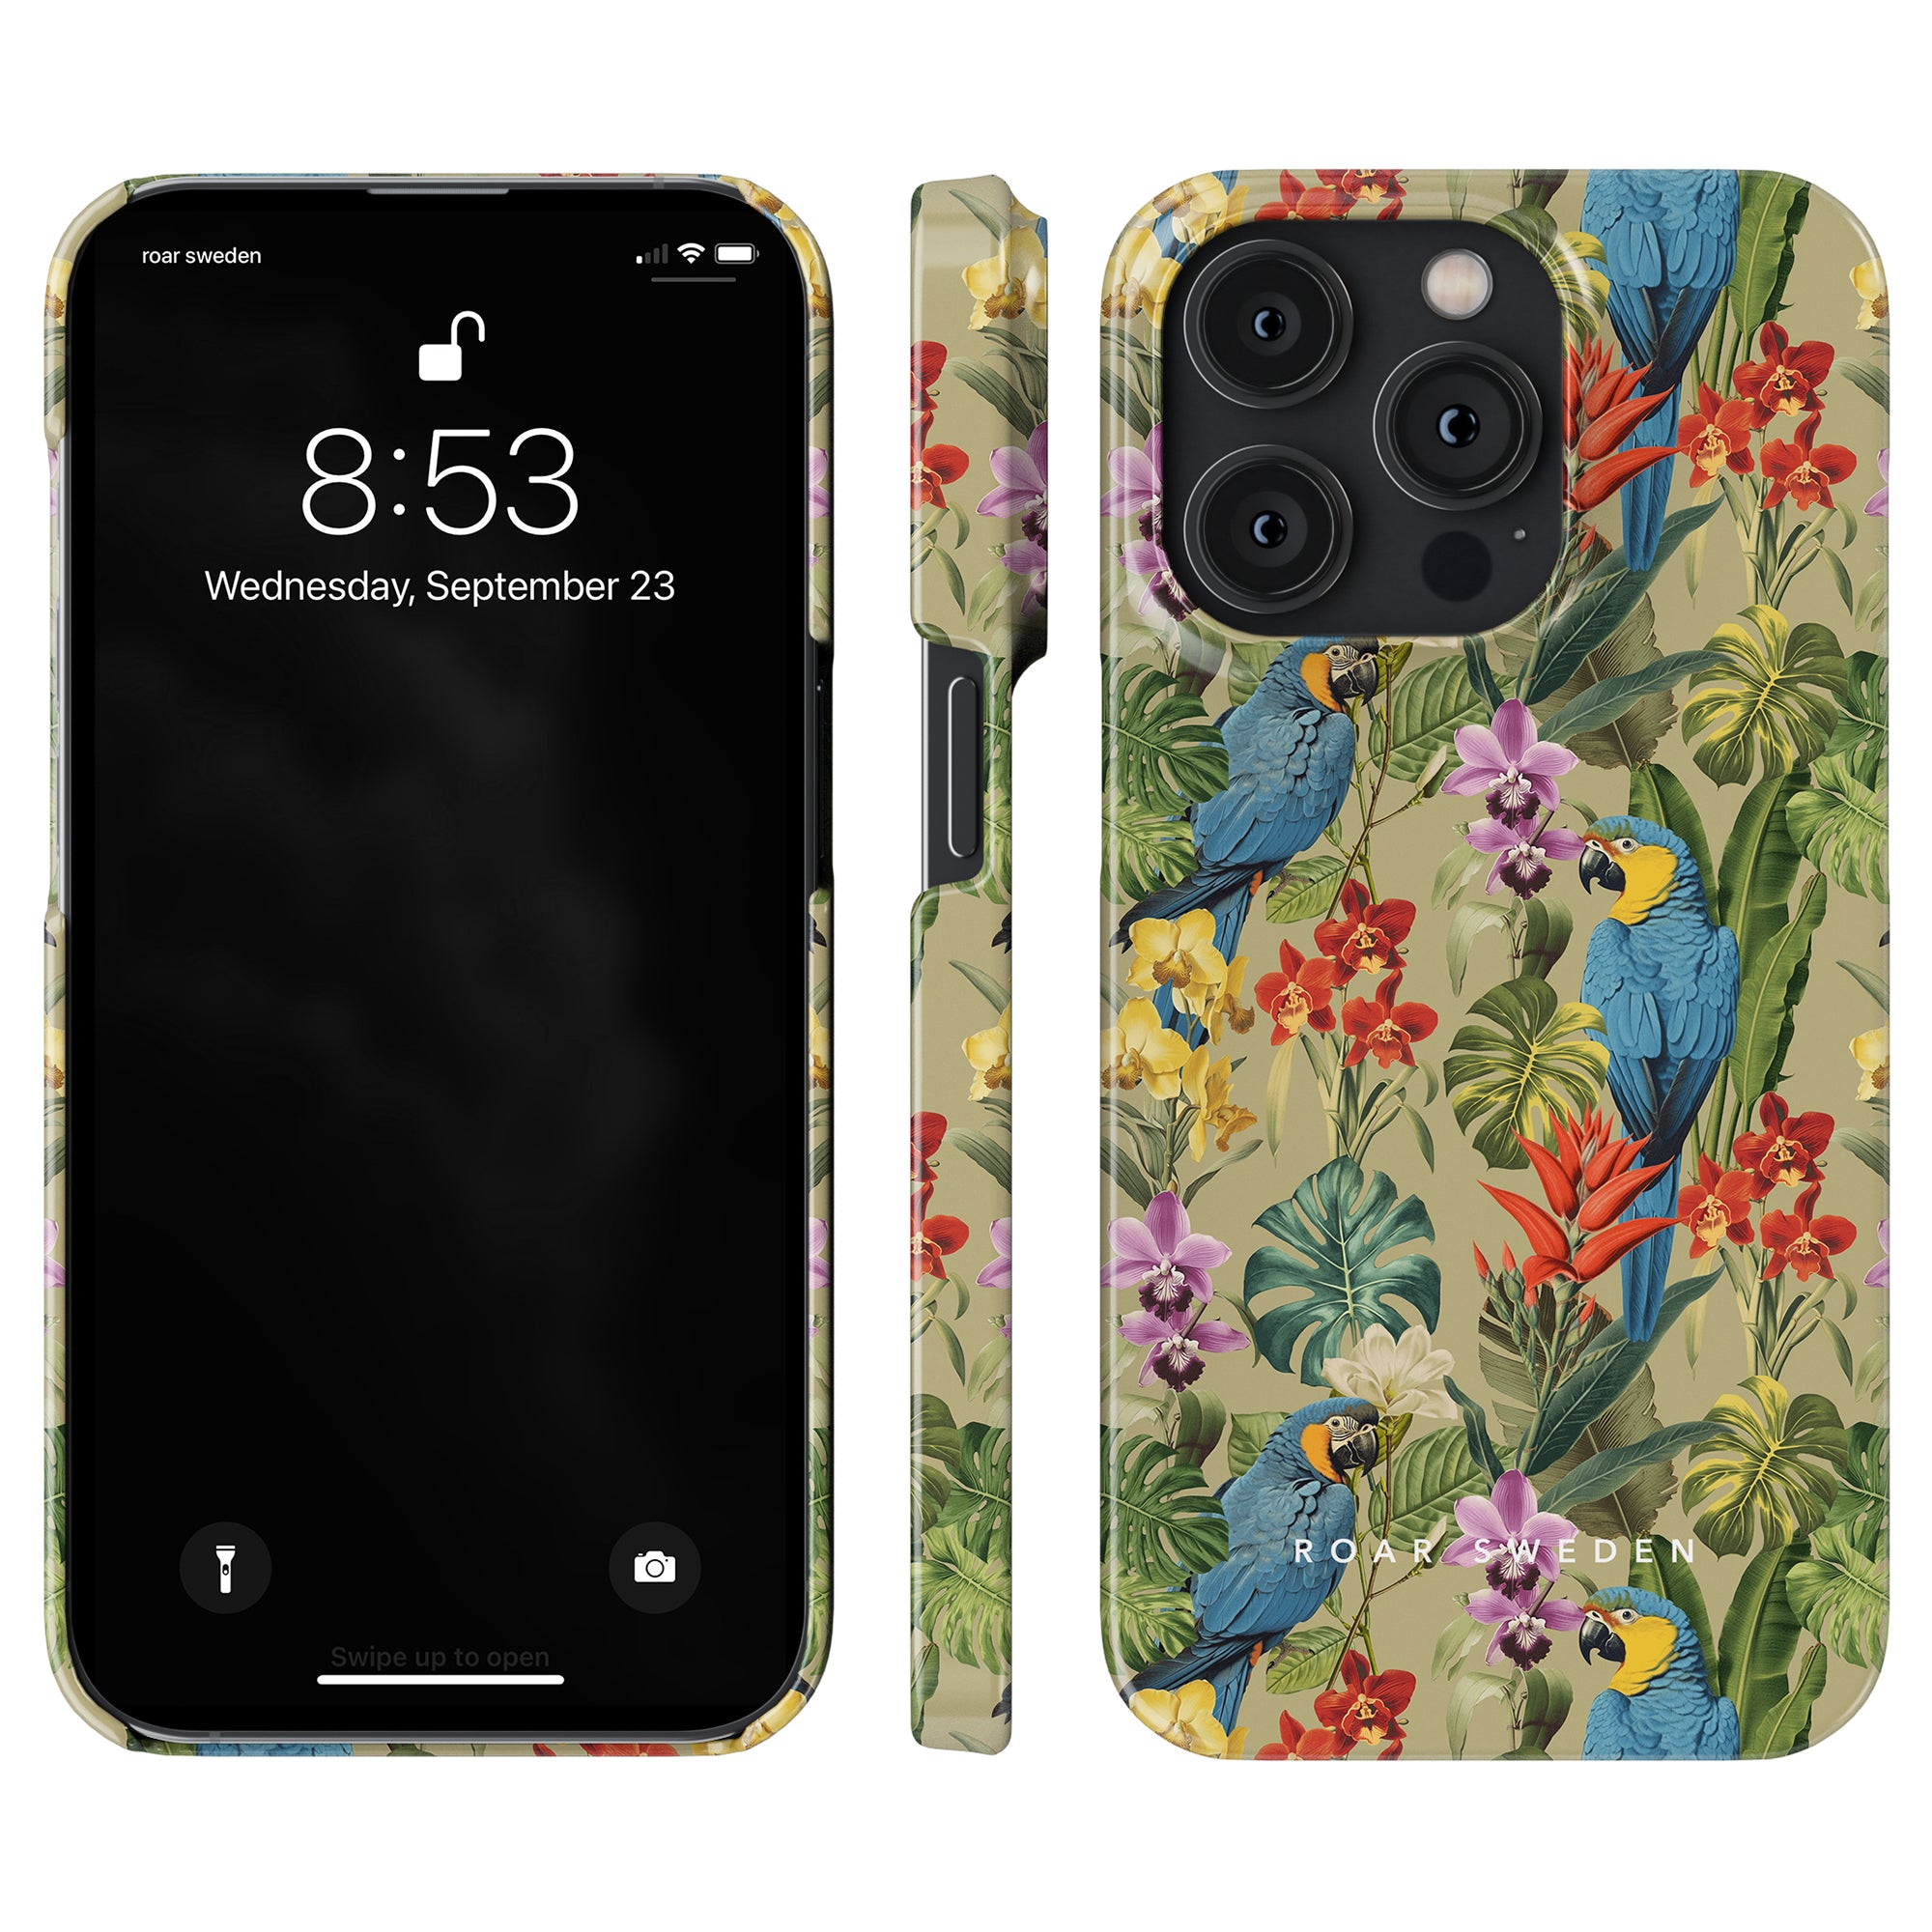 A smartphone with a tropical-themed, Verdant Beauty - Slim case from the Birds Collection, featuring blue parrots and colorful flowers on a light green background; the screen displays the time 8:53 and the date Wednesday, September 23.